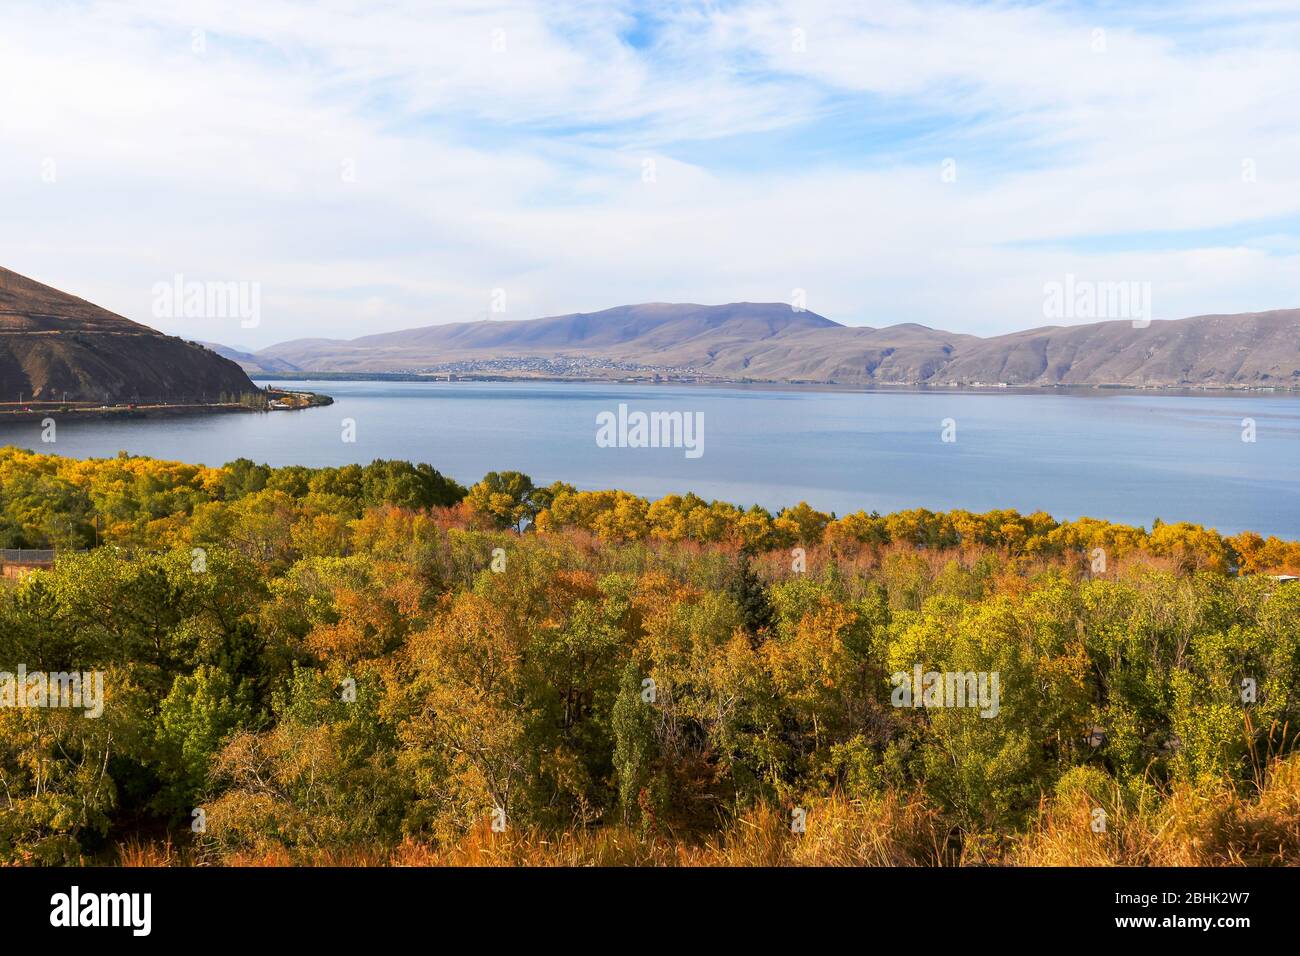 Sevan Lake in Armenia with beautiful trees in autumn colors. Alpine lake with mountains in the Caucasus. Popular Armenian touristic destination. Stock Photo